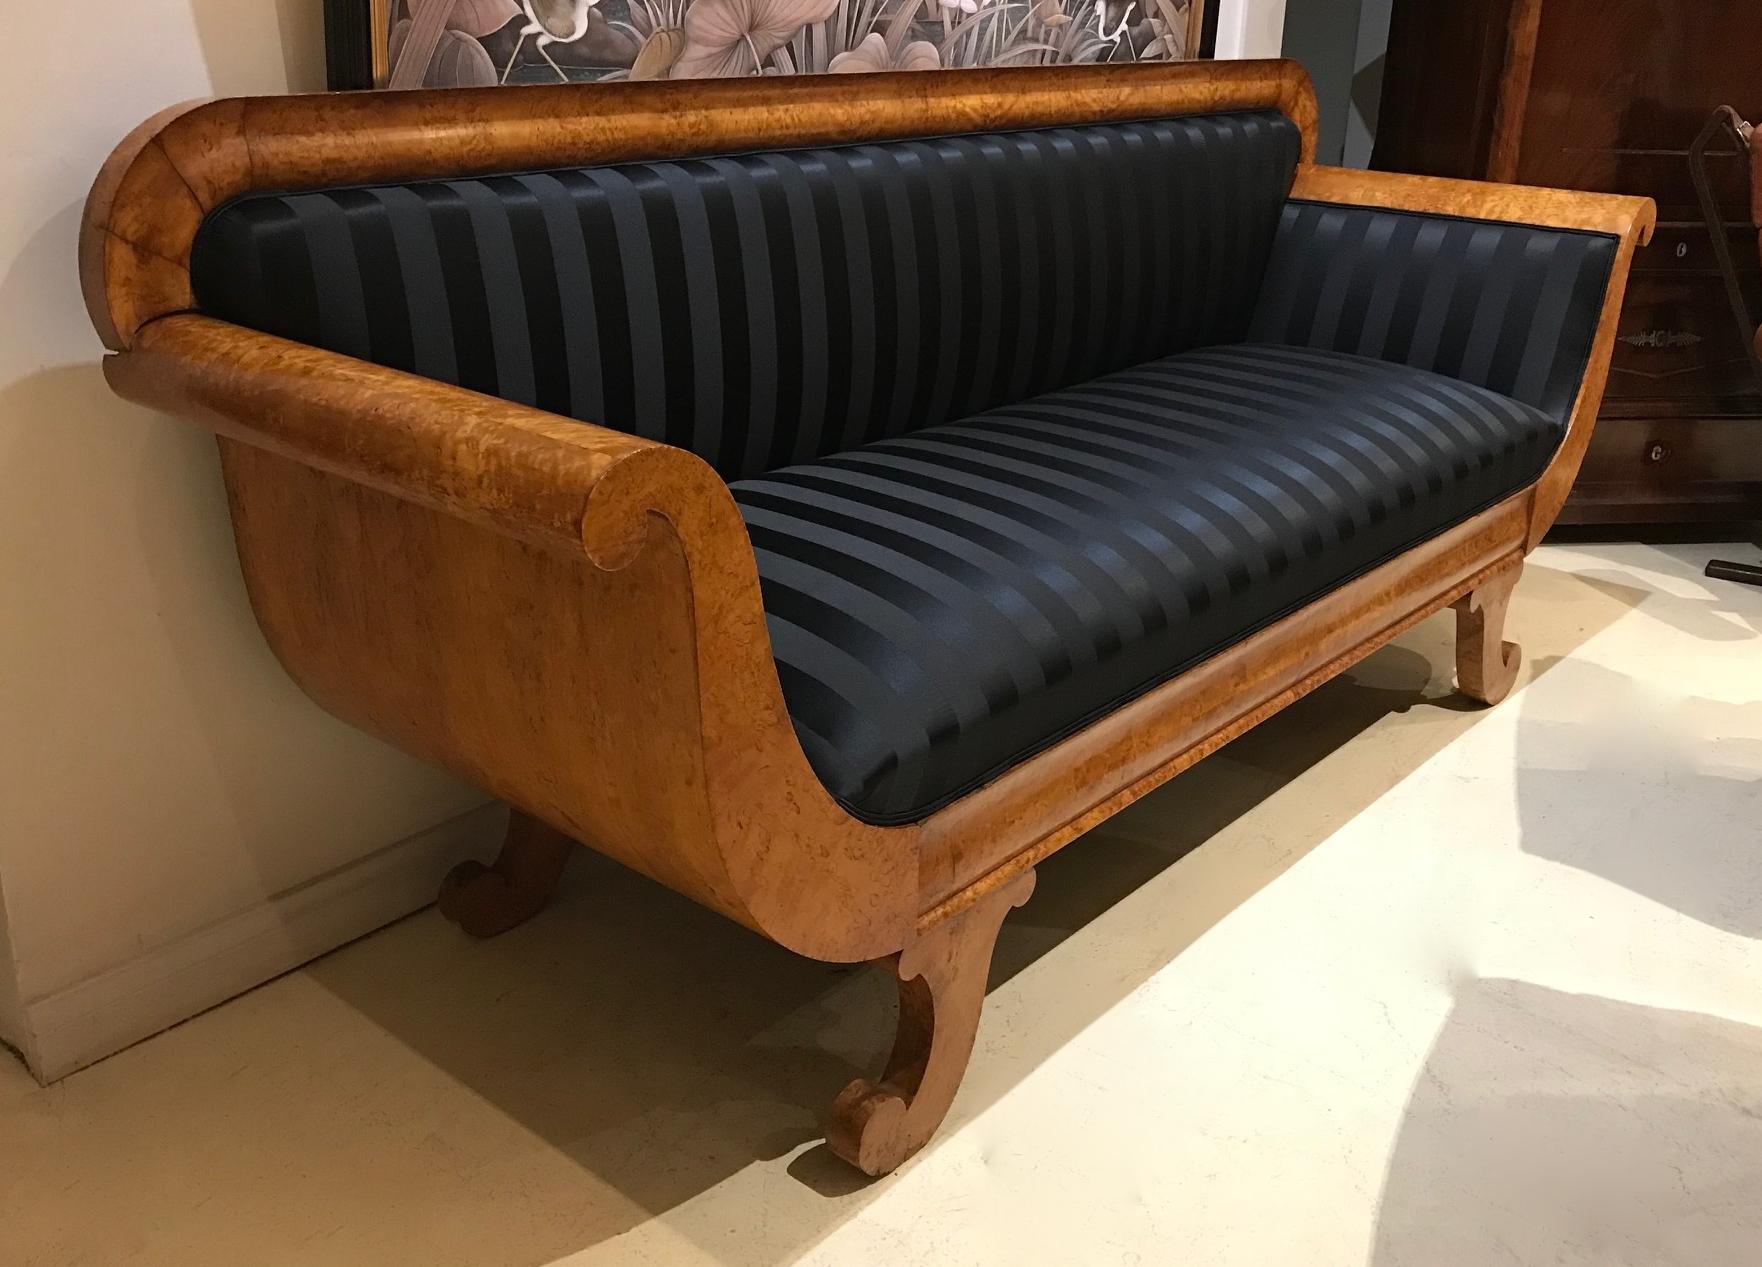 Magnificent Karelian birch sofa with solid sides. 

This sofa base been completely refurbished and reupholstered. 

It is very comfortable and in excellent condition. It is a very solid piece, yet has an elegance given by the curved back and